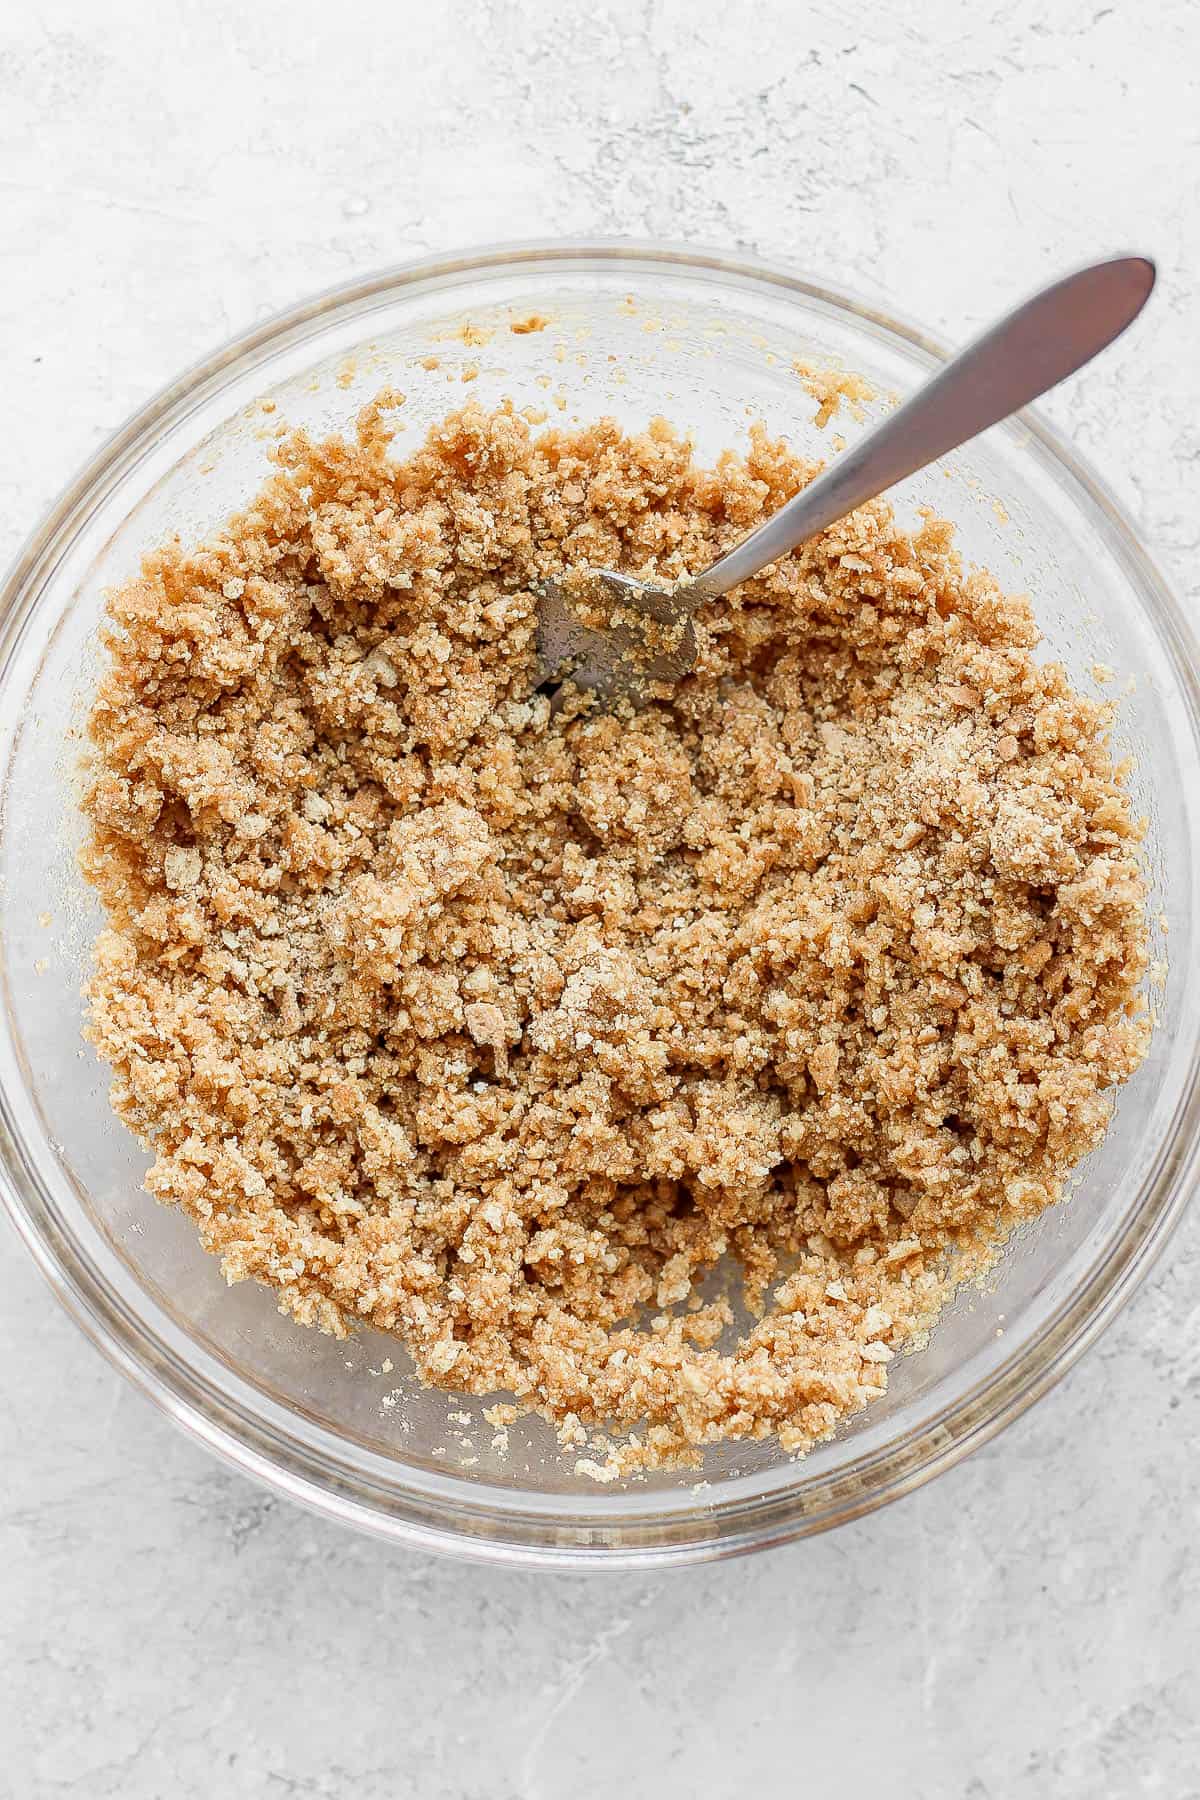 A bowl with graham cracker crust ingredients.